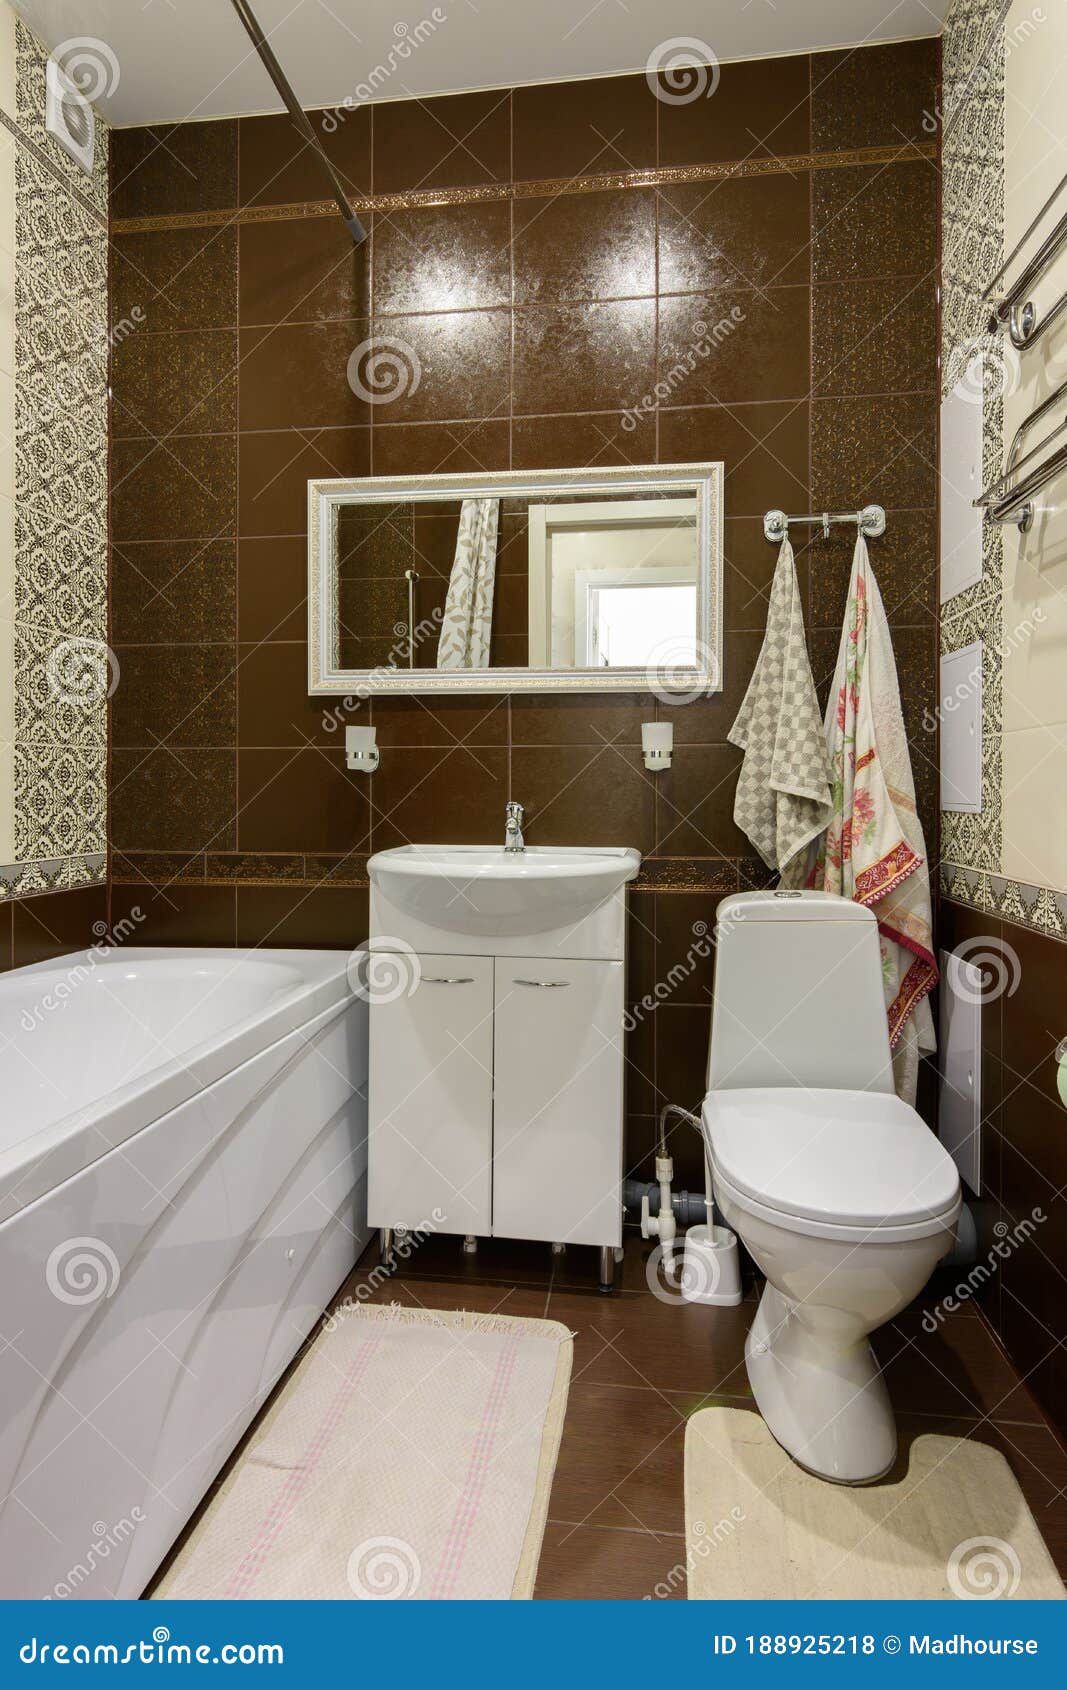 the interior of the bathroom is made in a classic style